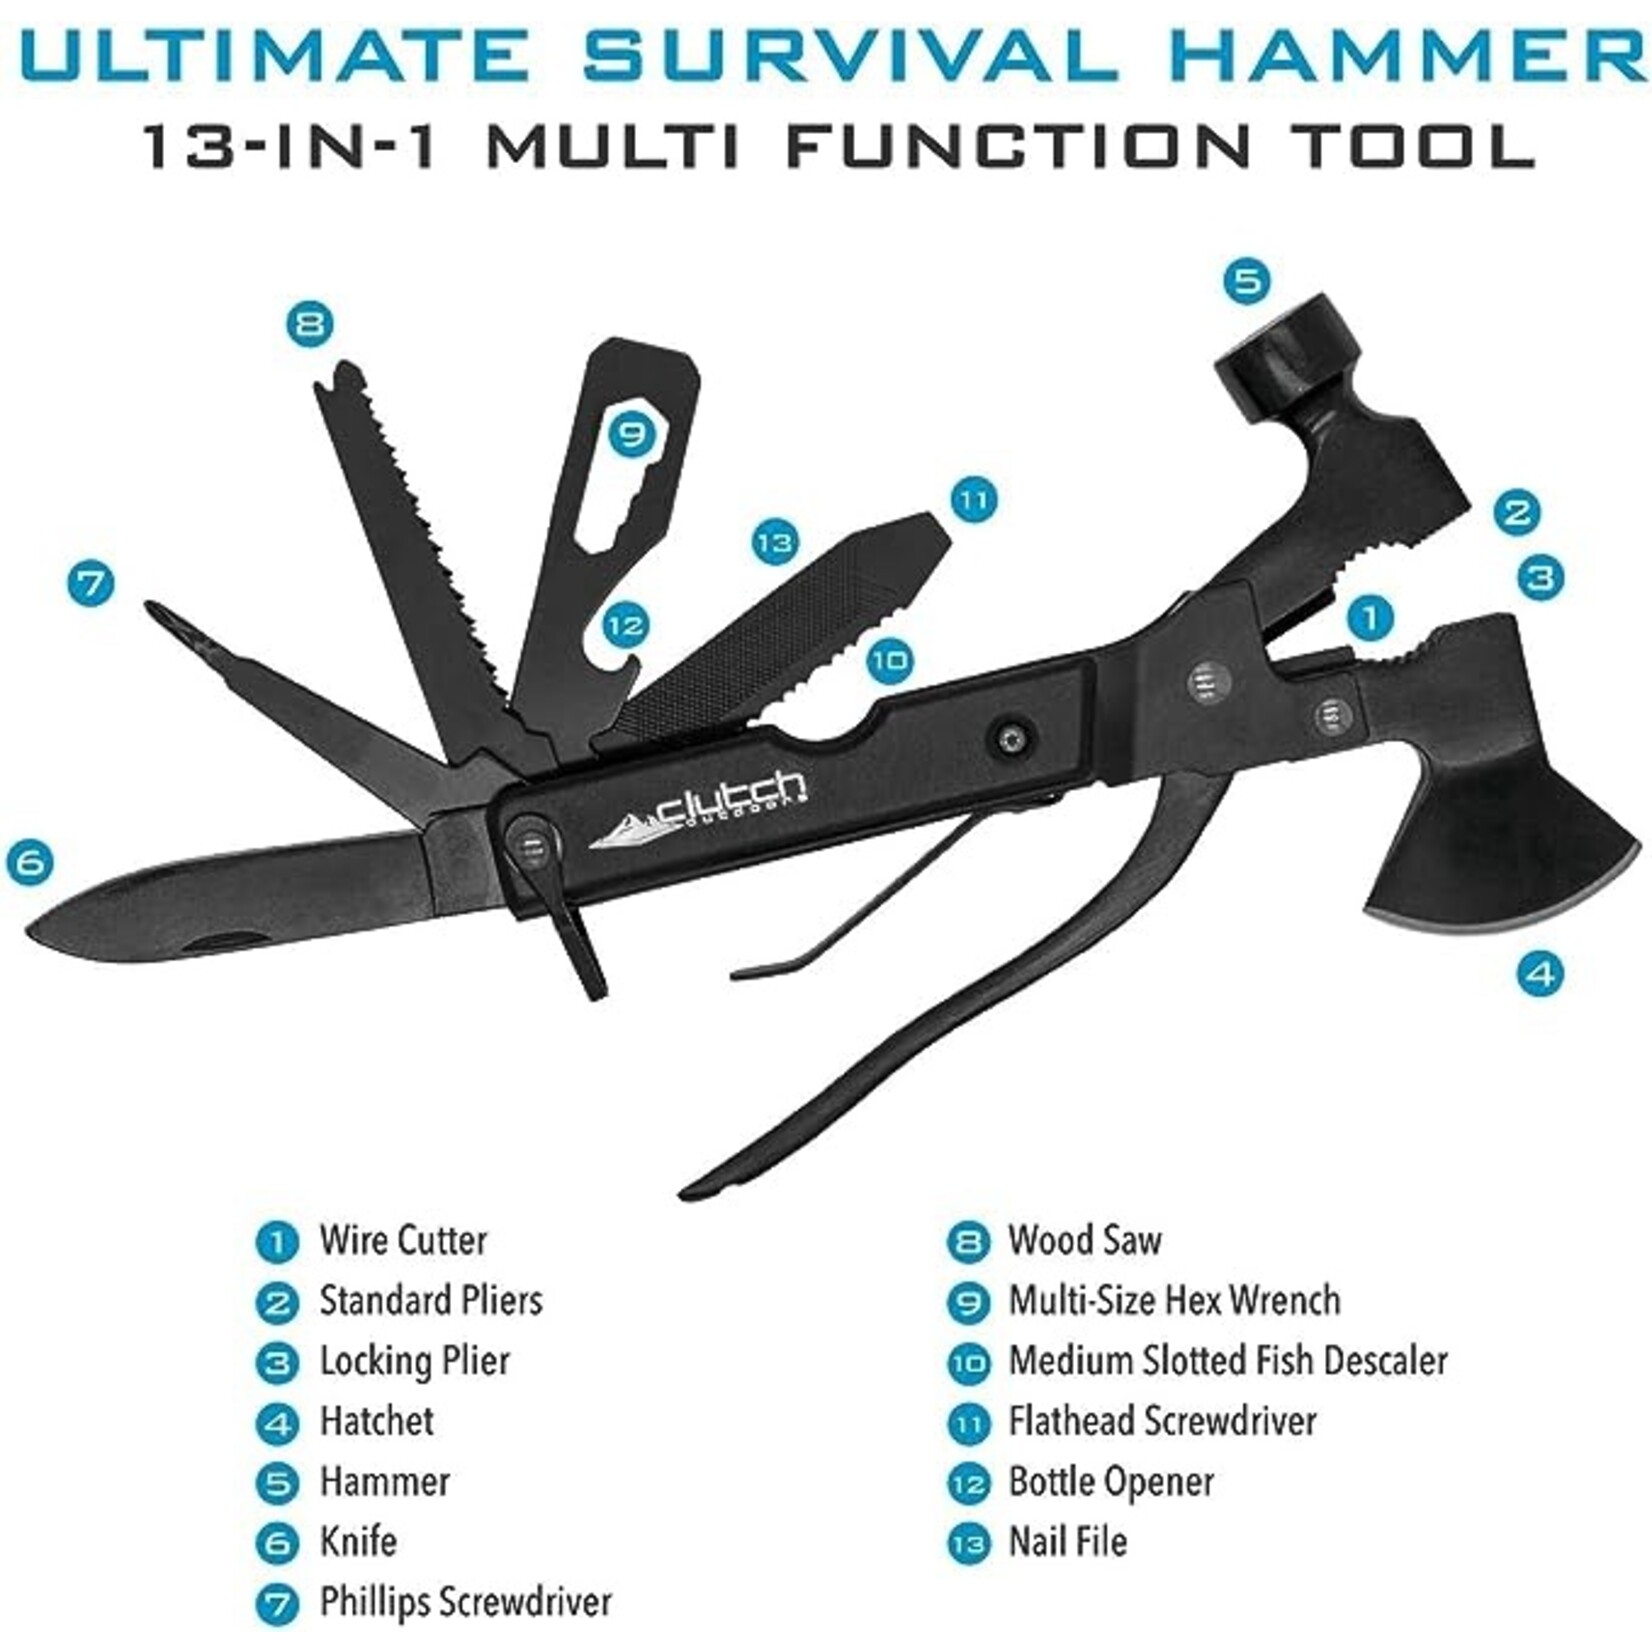 Clutch Outdoors Survival Hammer Multitool